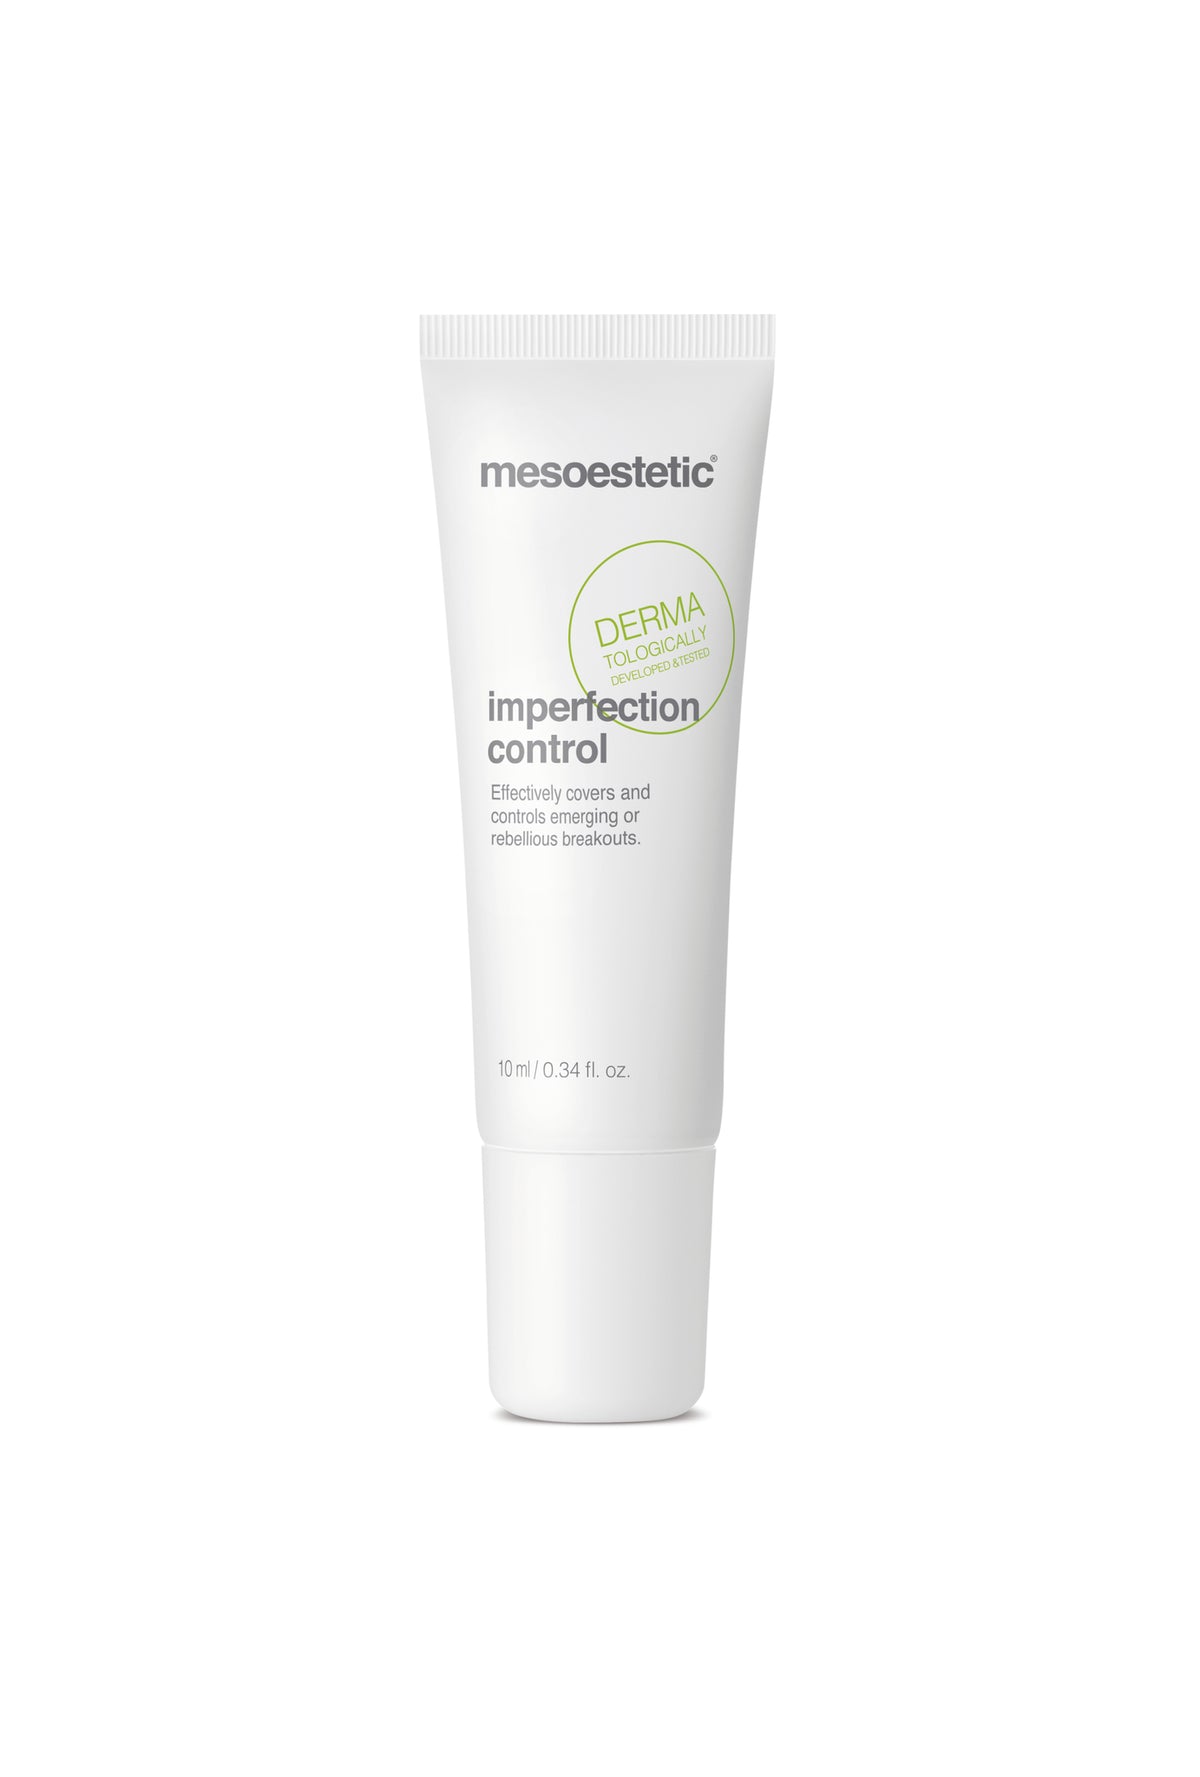 Mesoestetic Imperfection control